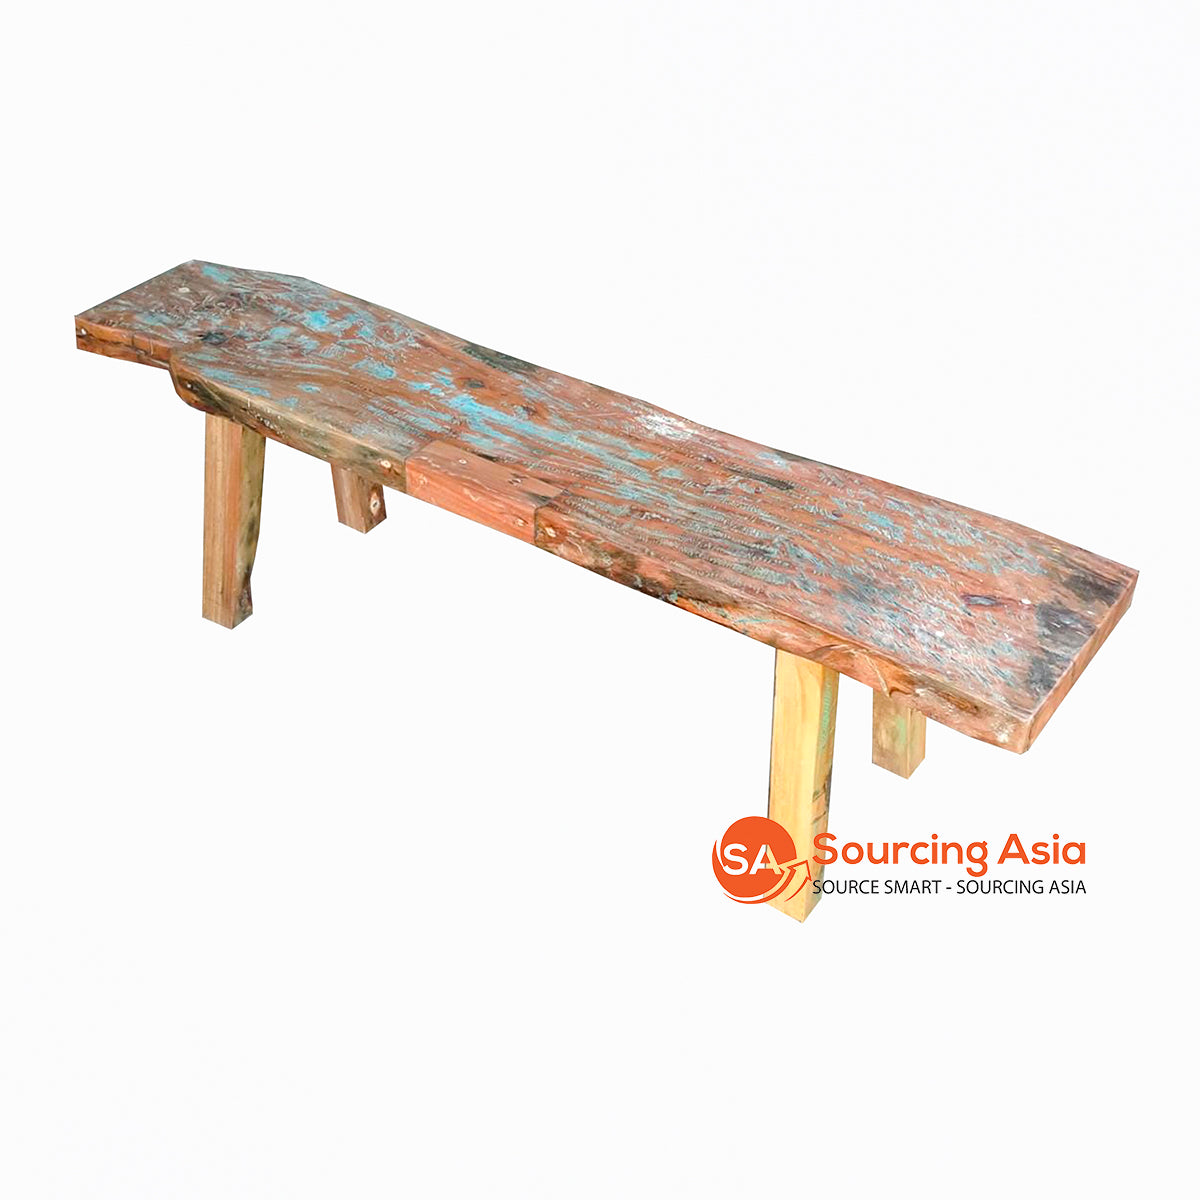 FAK47 RECYCLED BOAT BENCH